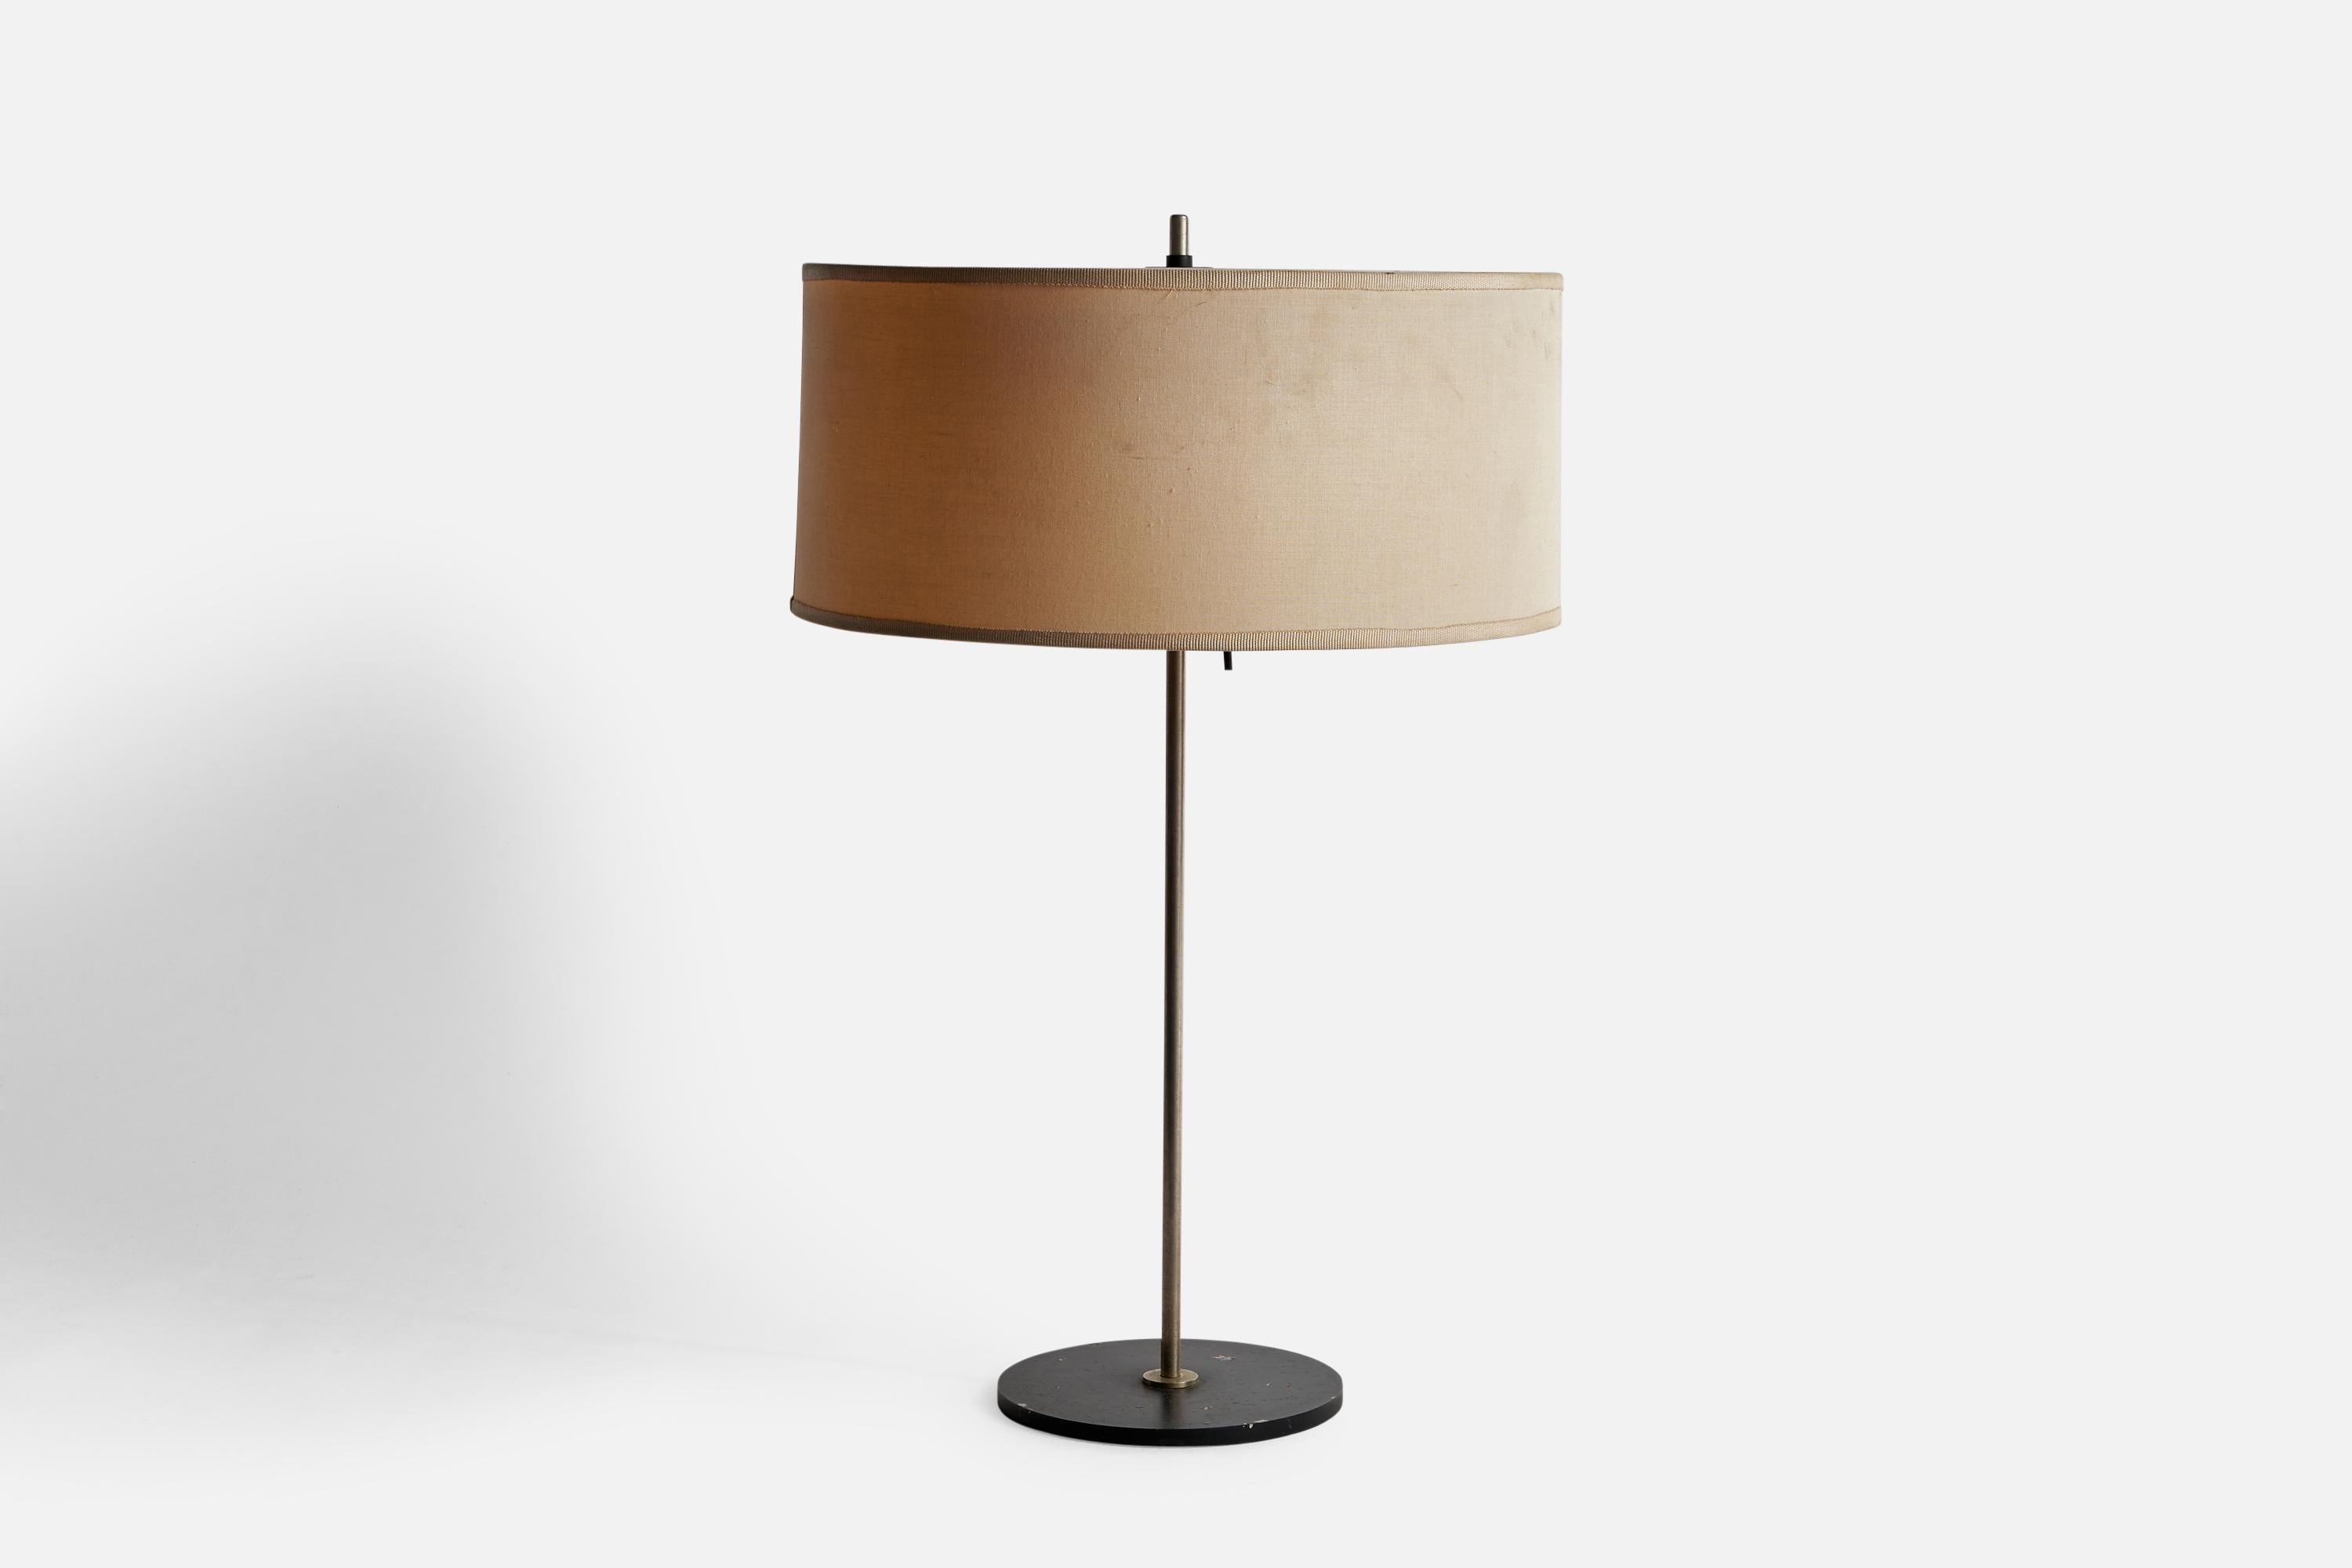 An adjustable steel, black-lacquered metal and off-white fabric table lamp attributed to Angelo Ostuni, Italy, c. 1960s.

Overall Dimensions (inches): 20.75” H x 13” Diameter
Shade height is adjustable
Bulb Specifications: E-26 Bulbs
Number of